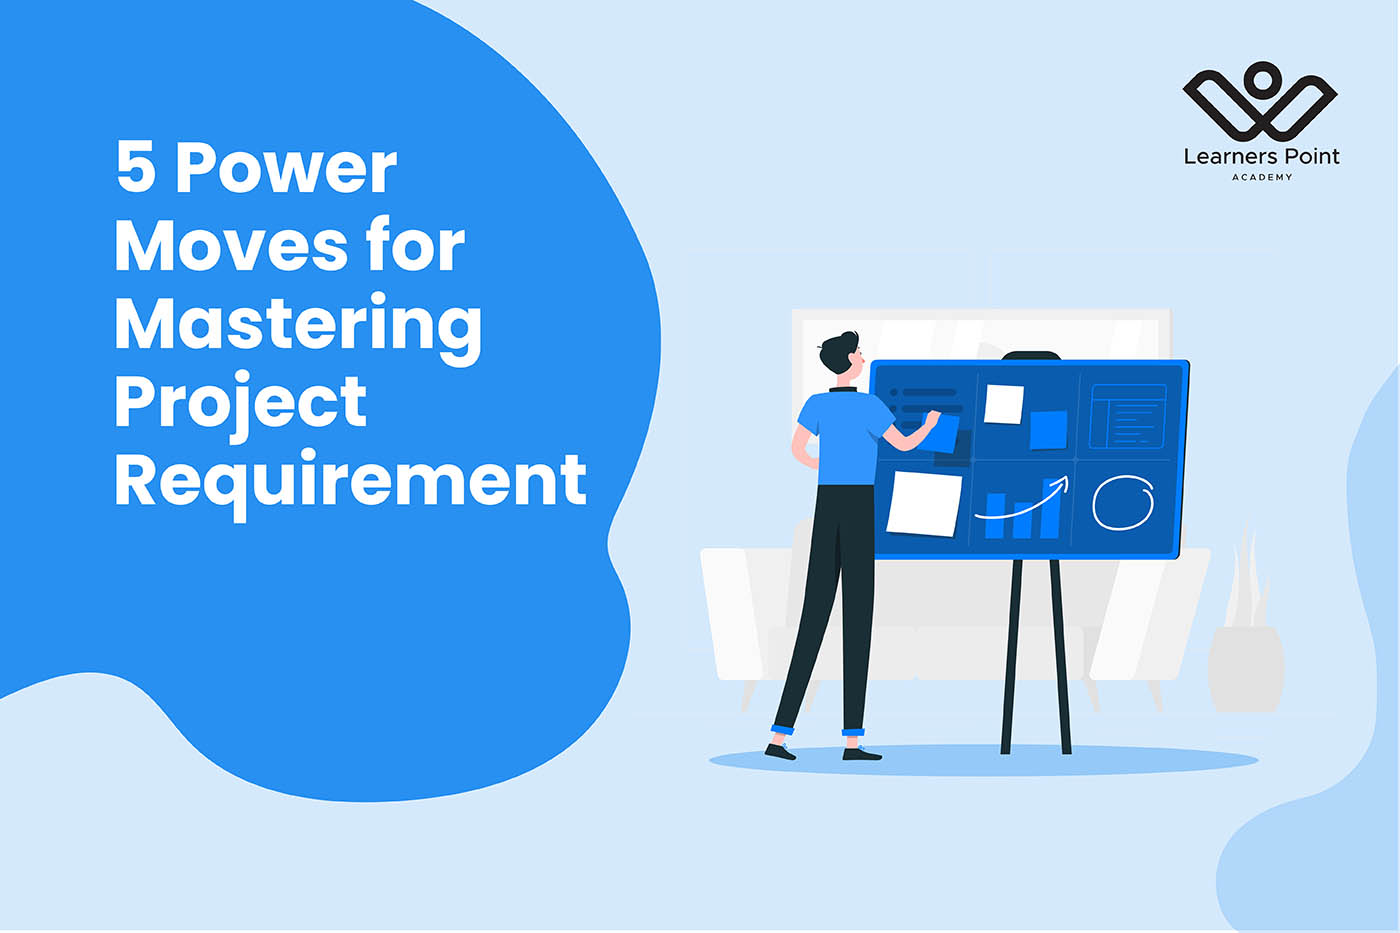 5 Power Moves for Mastering Project Requirements